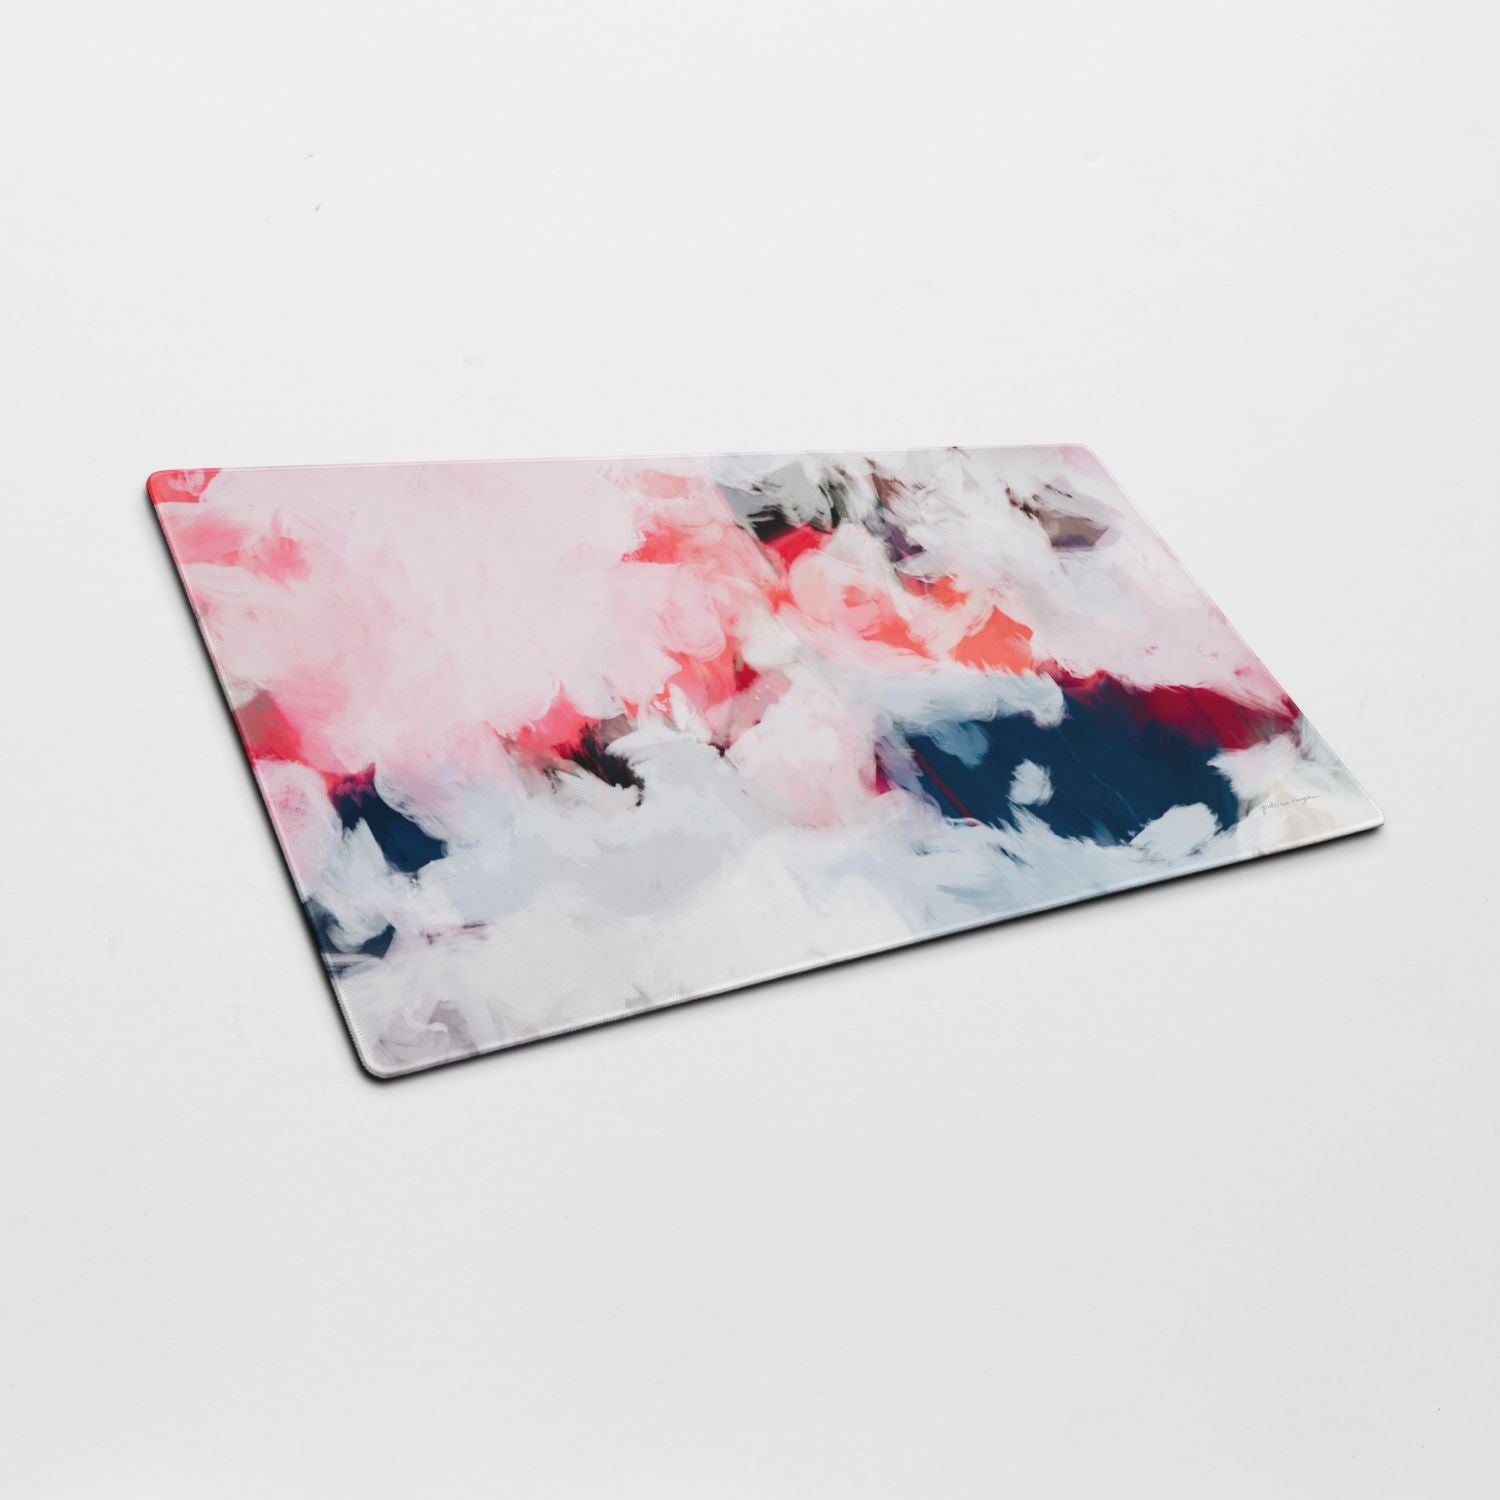 Oceane, colorful mouse pad for styling your office desk. Featuring artwork by Parima Studio. Home office styling accessories, cubicle styling accessories.